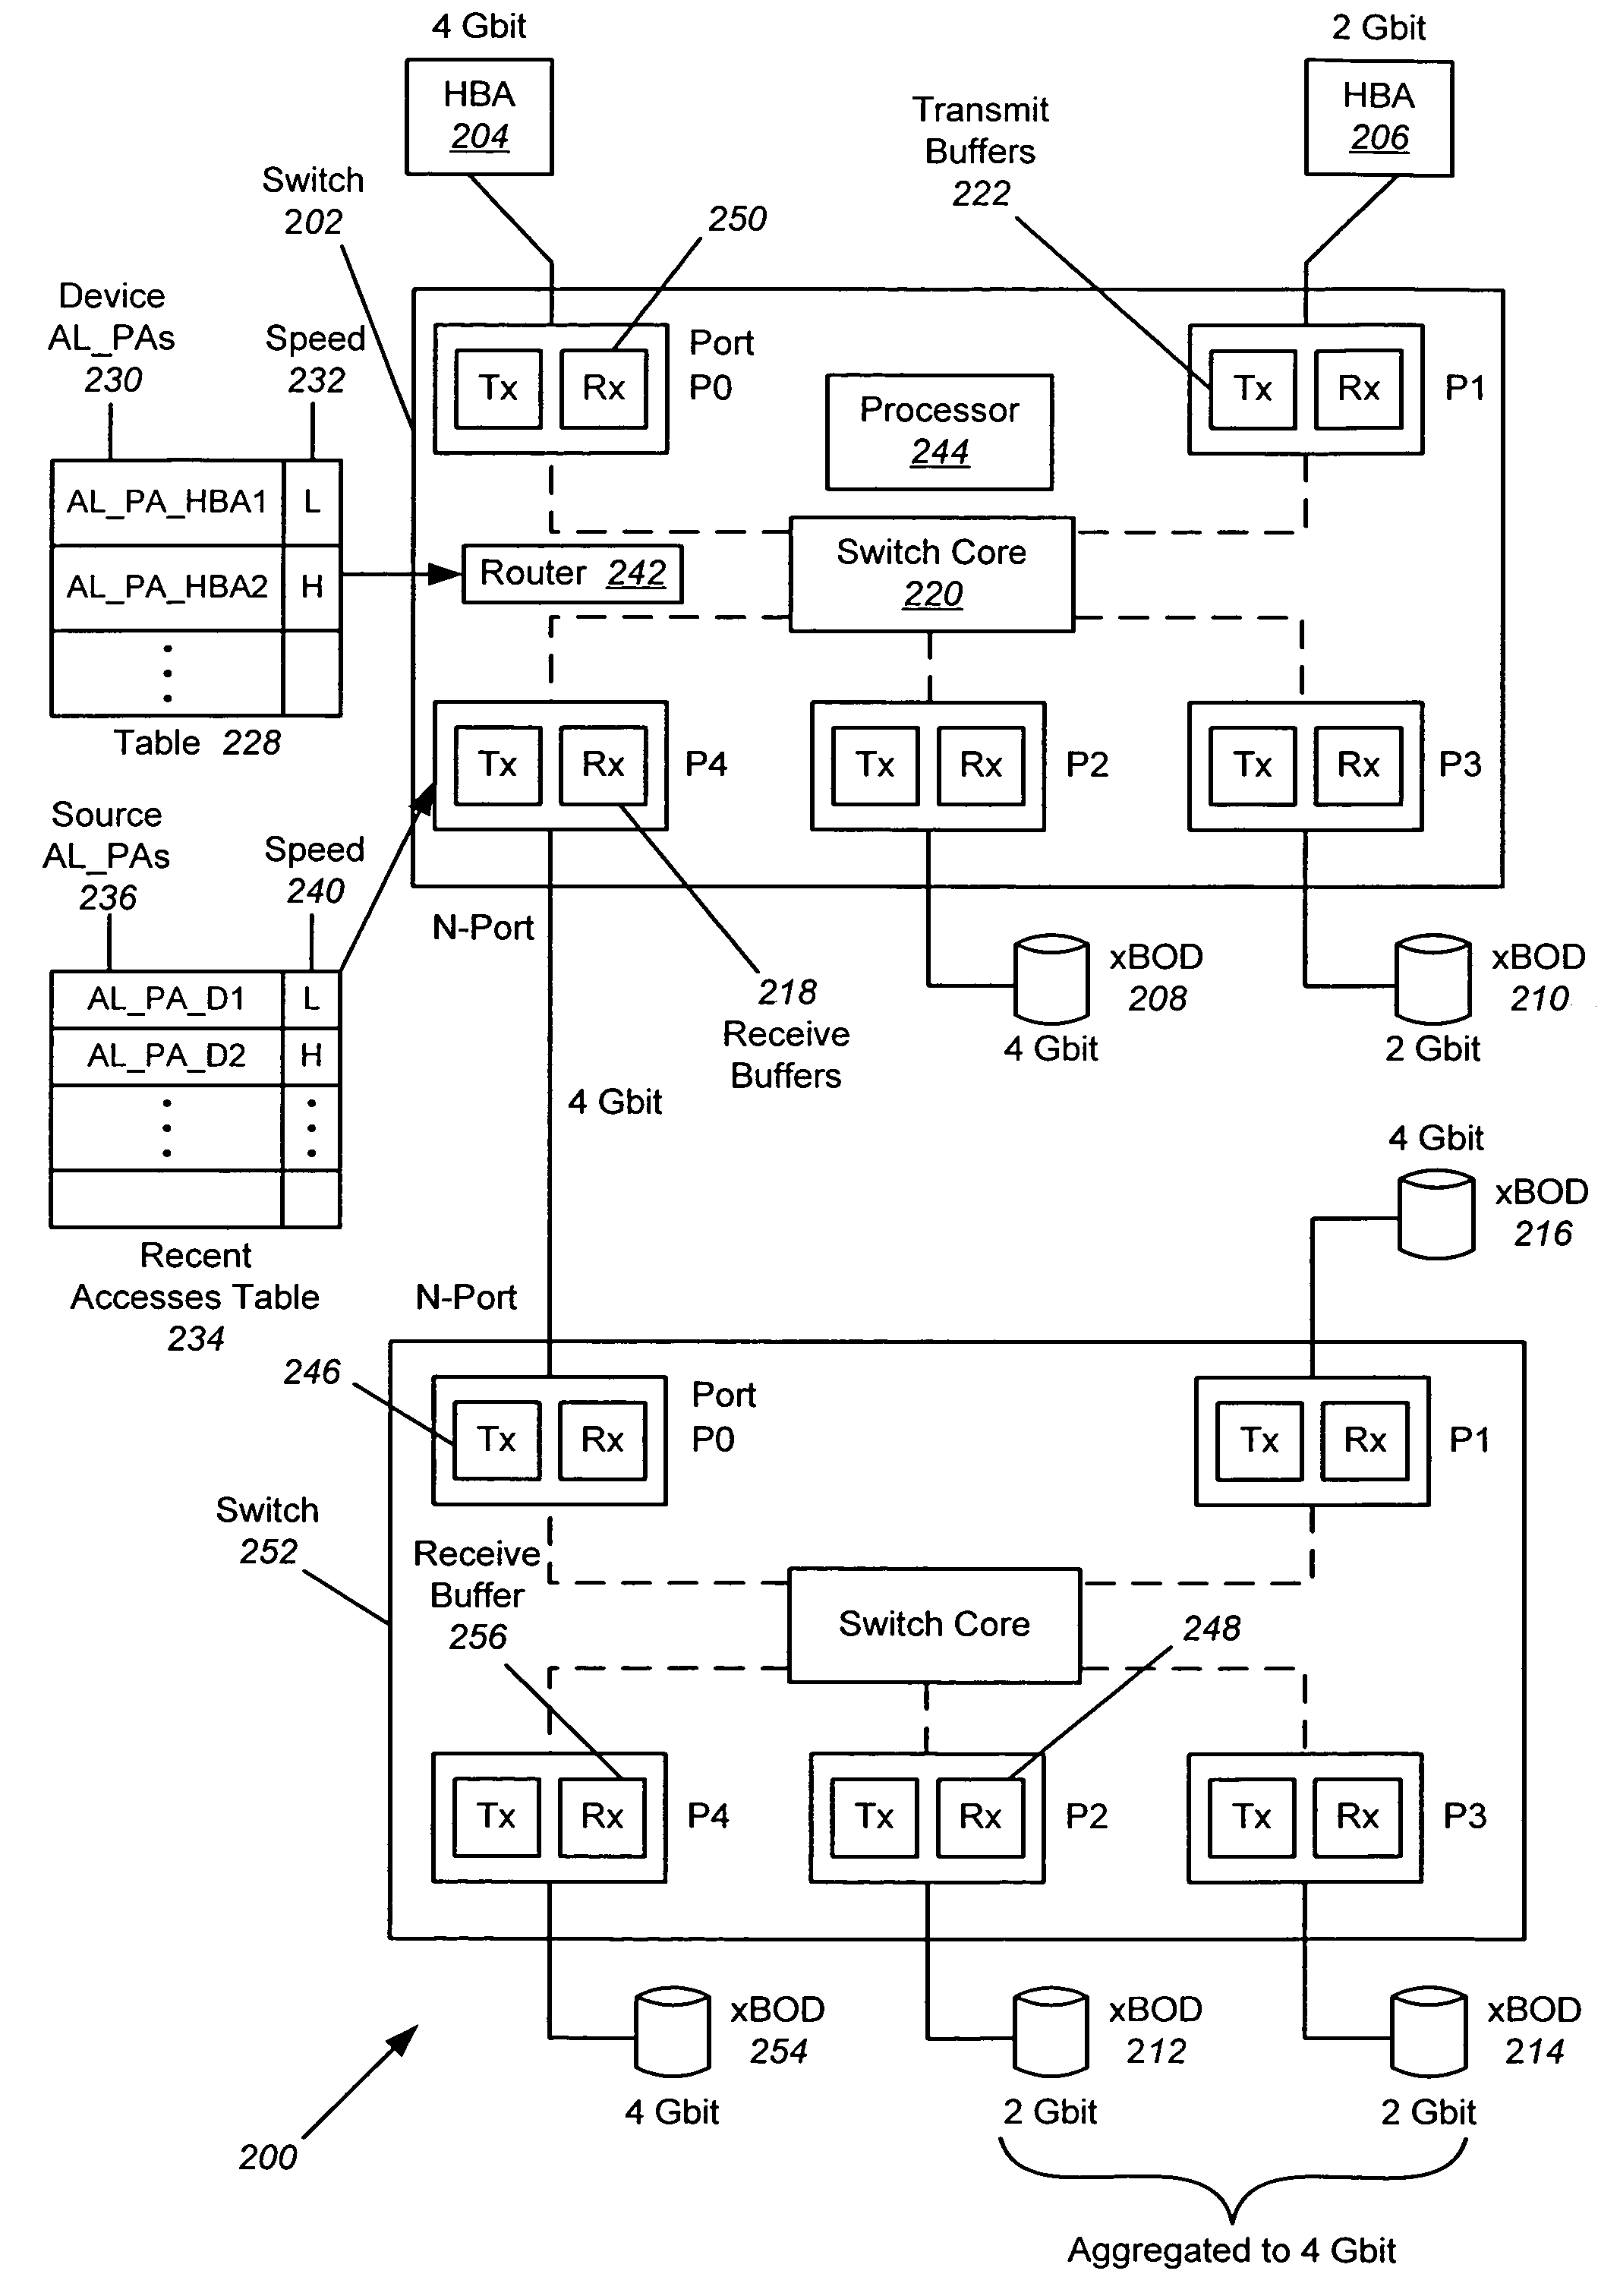 Prevention of head of line blocking in a multi-rate switched Fibre Channel loop attached system